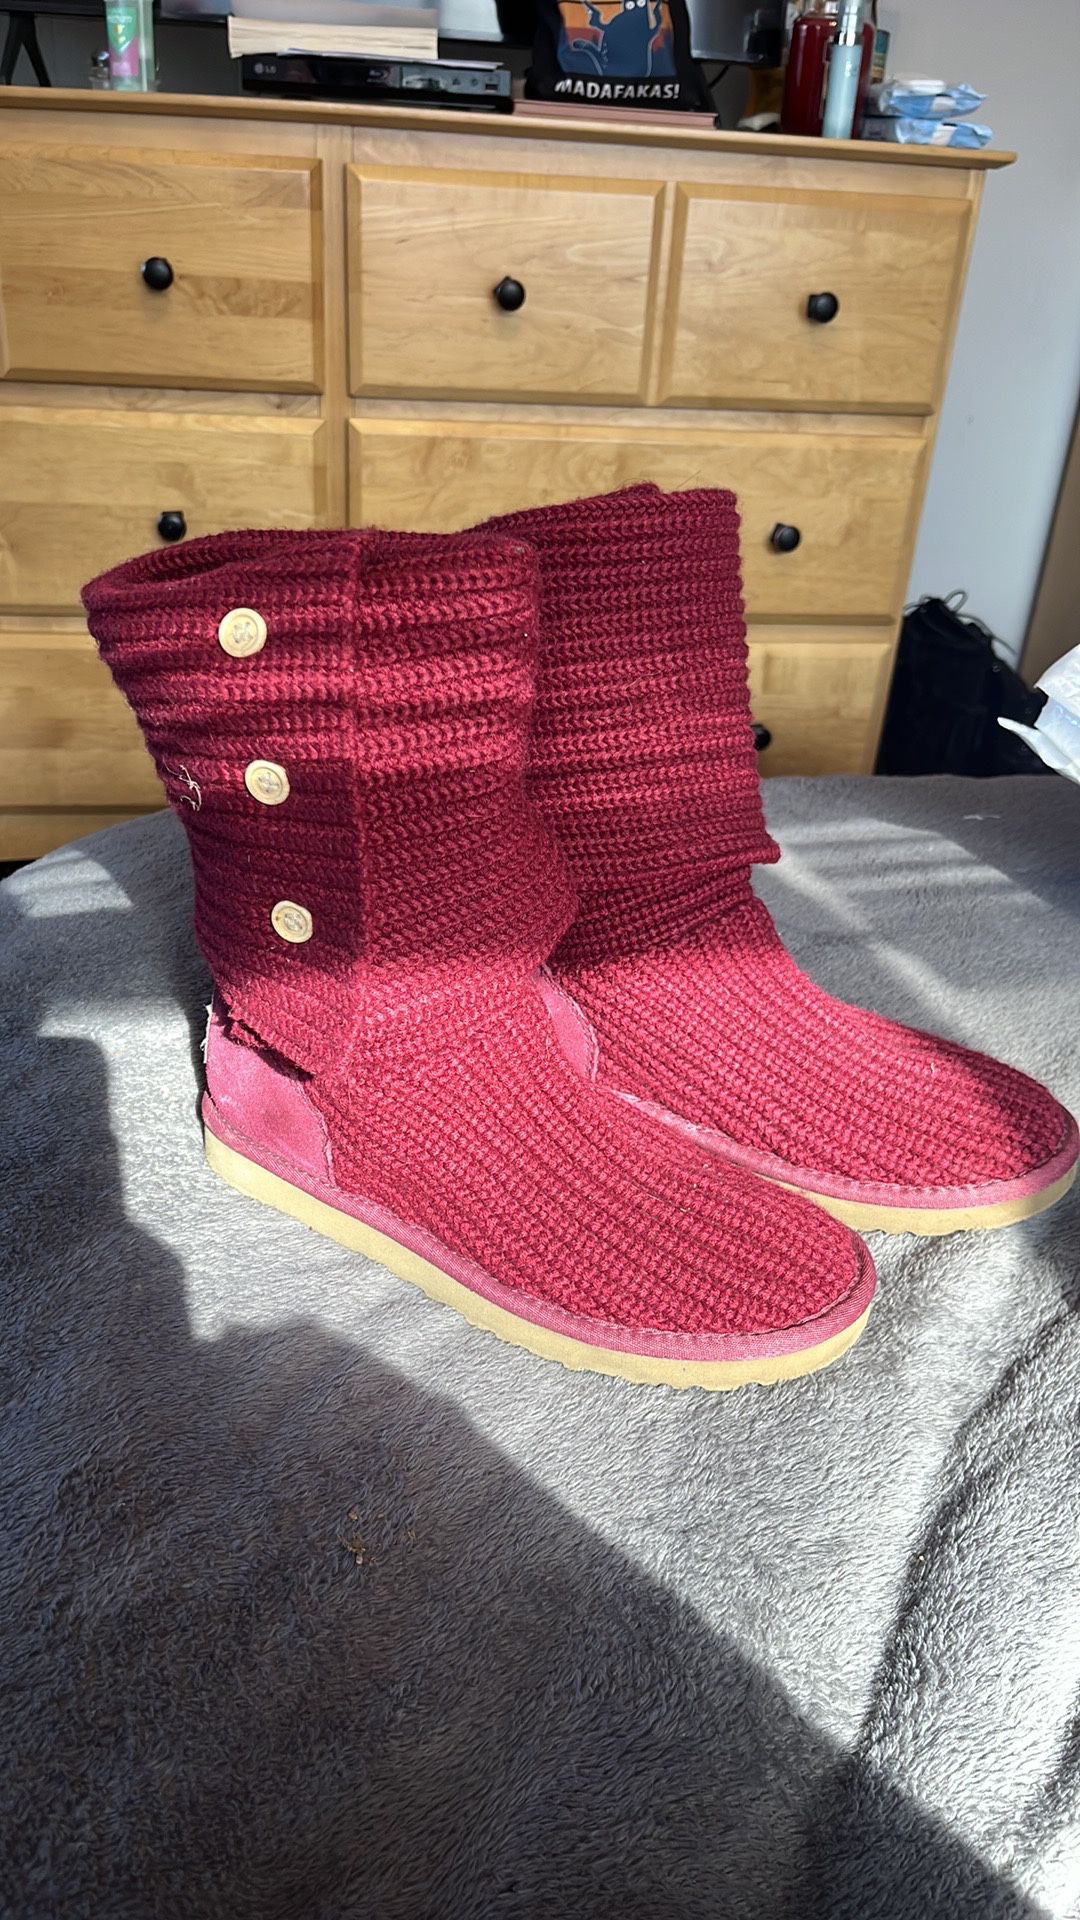 Ugg Sweater Boots